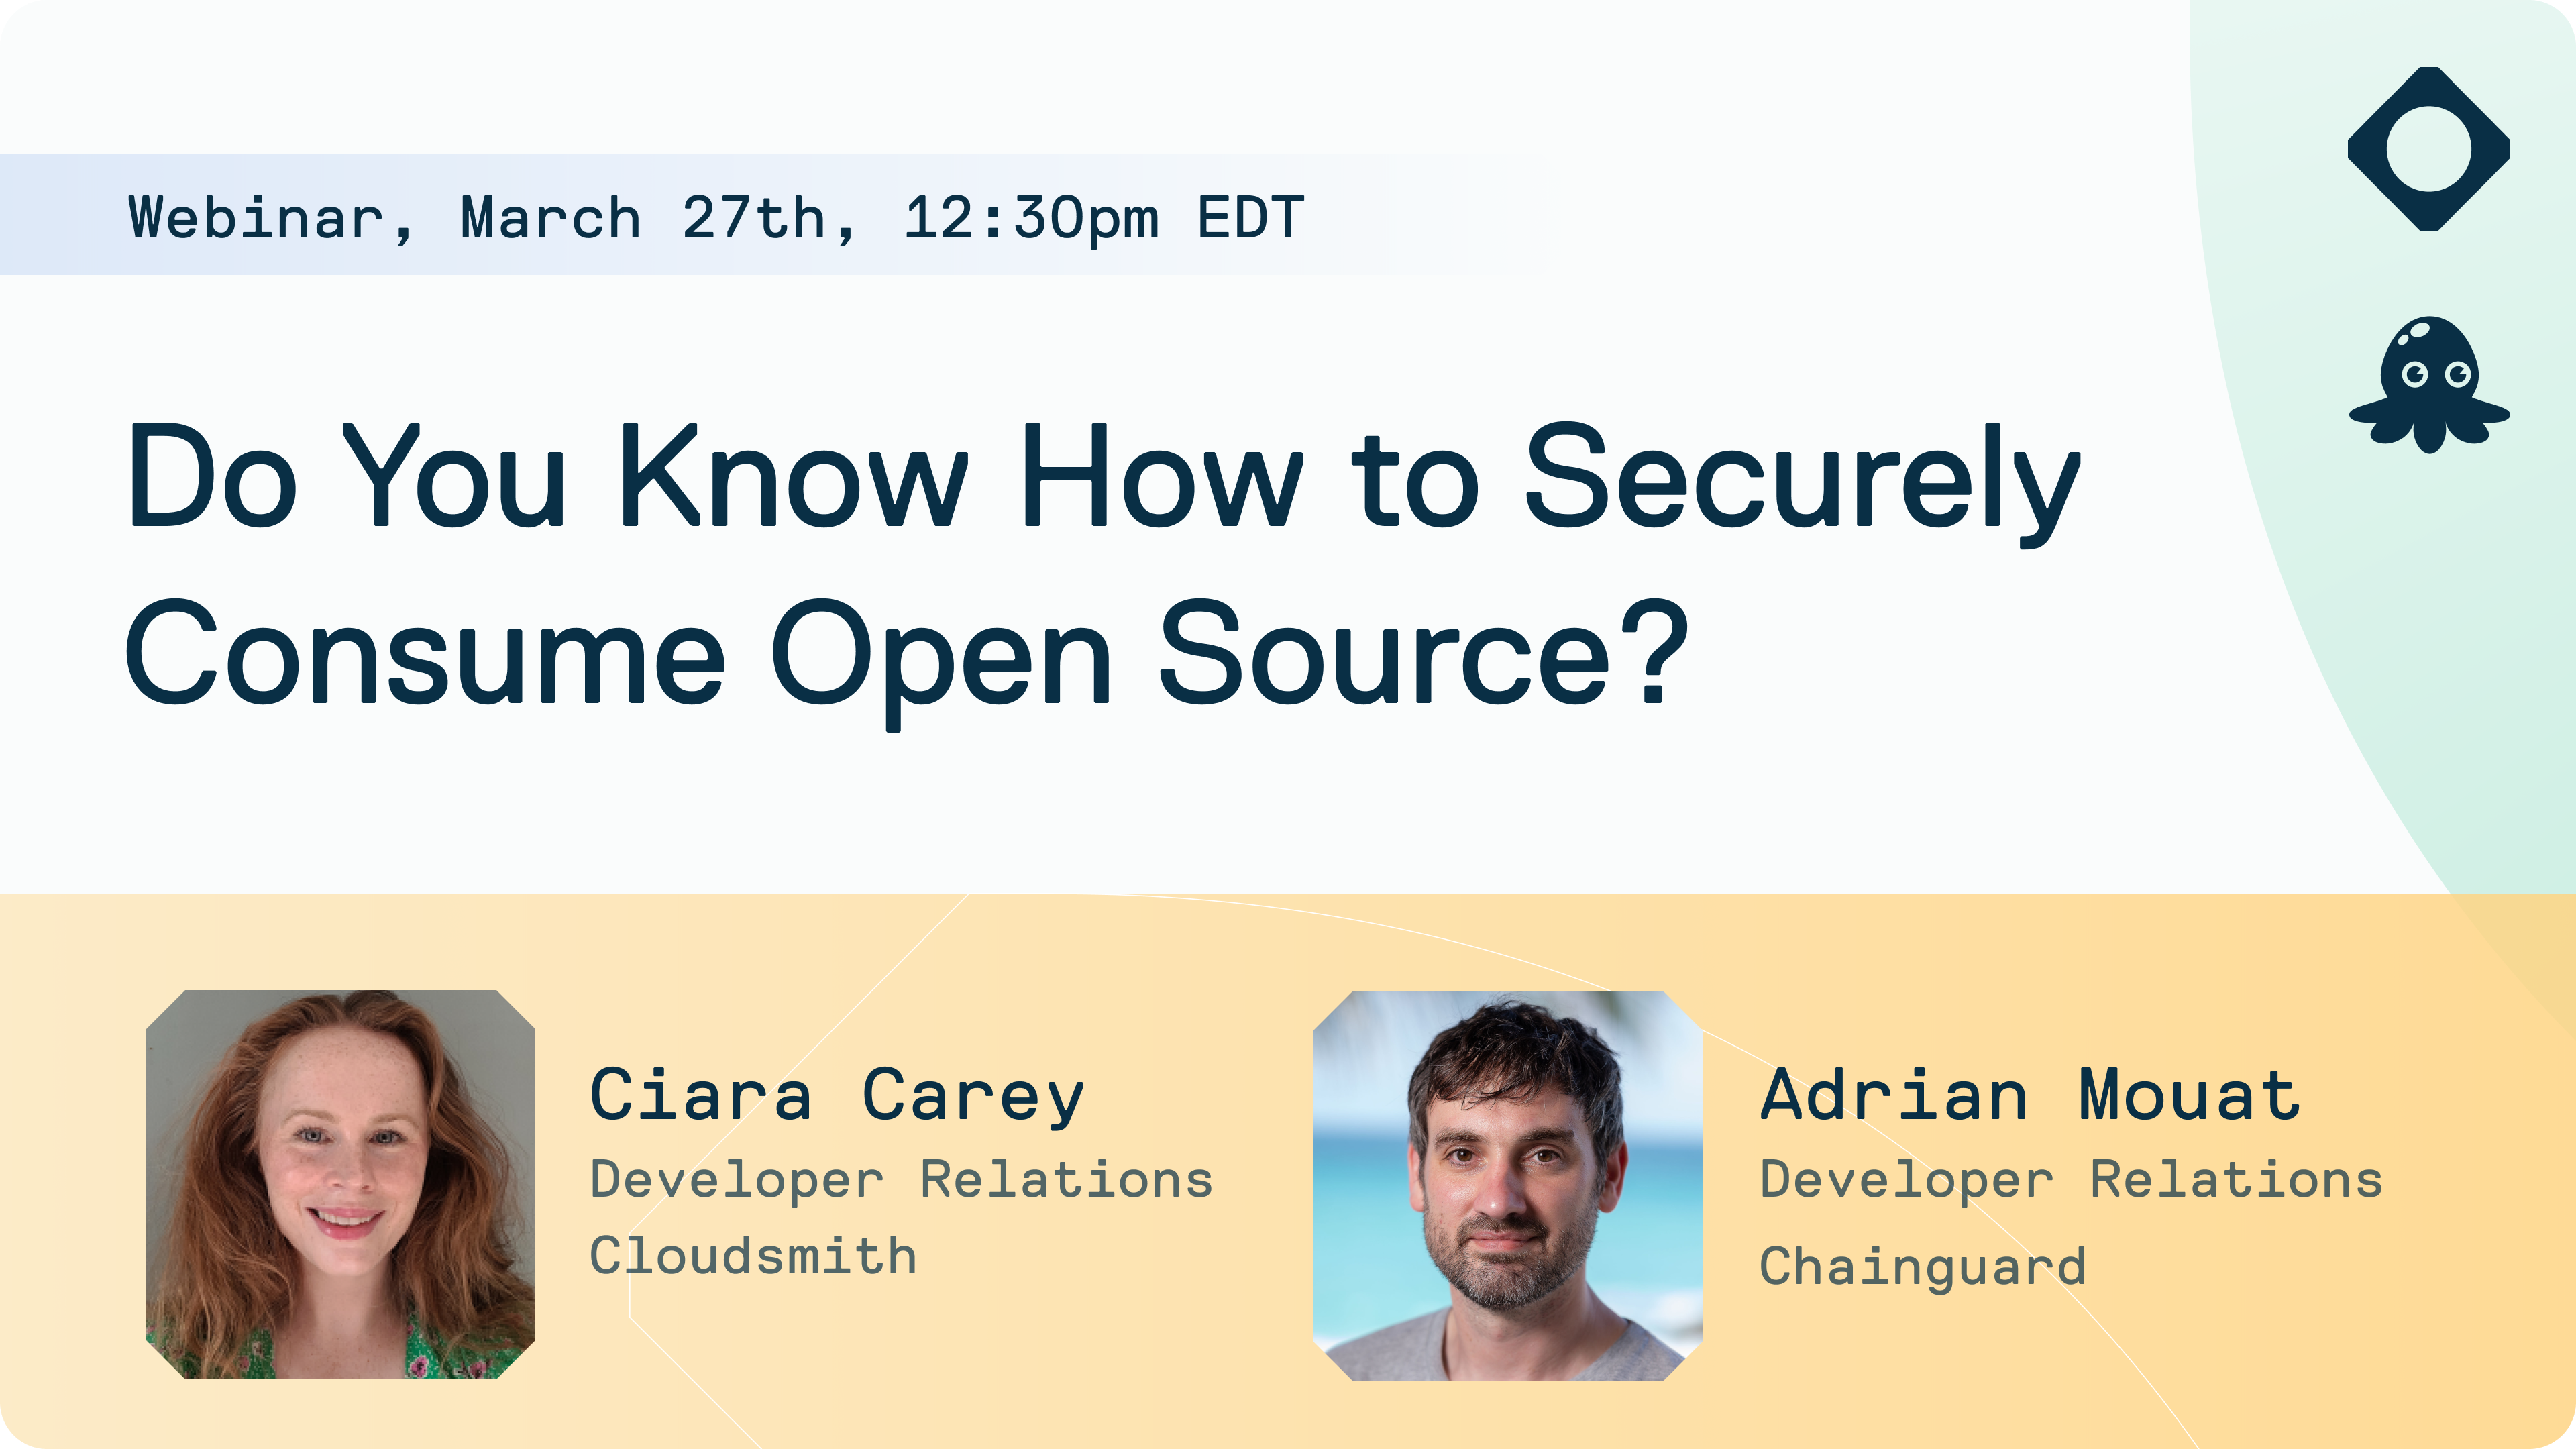 Do You Know How to Securely Consume Open Source?